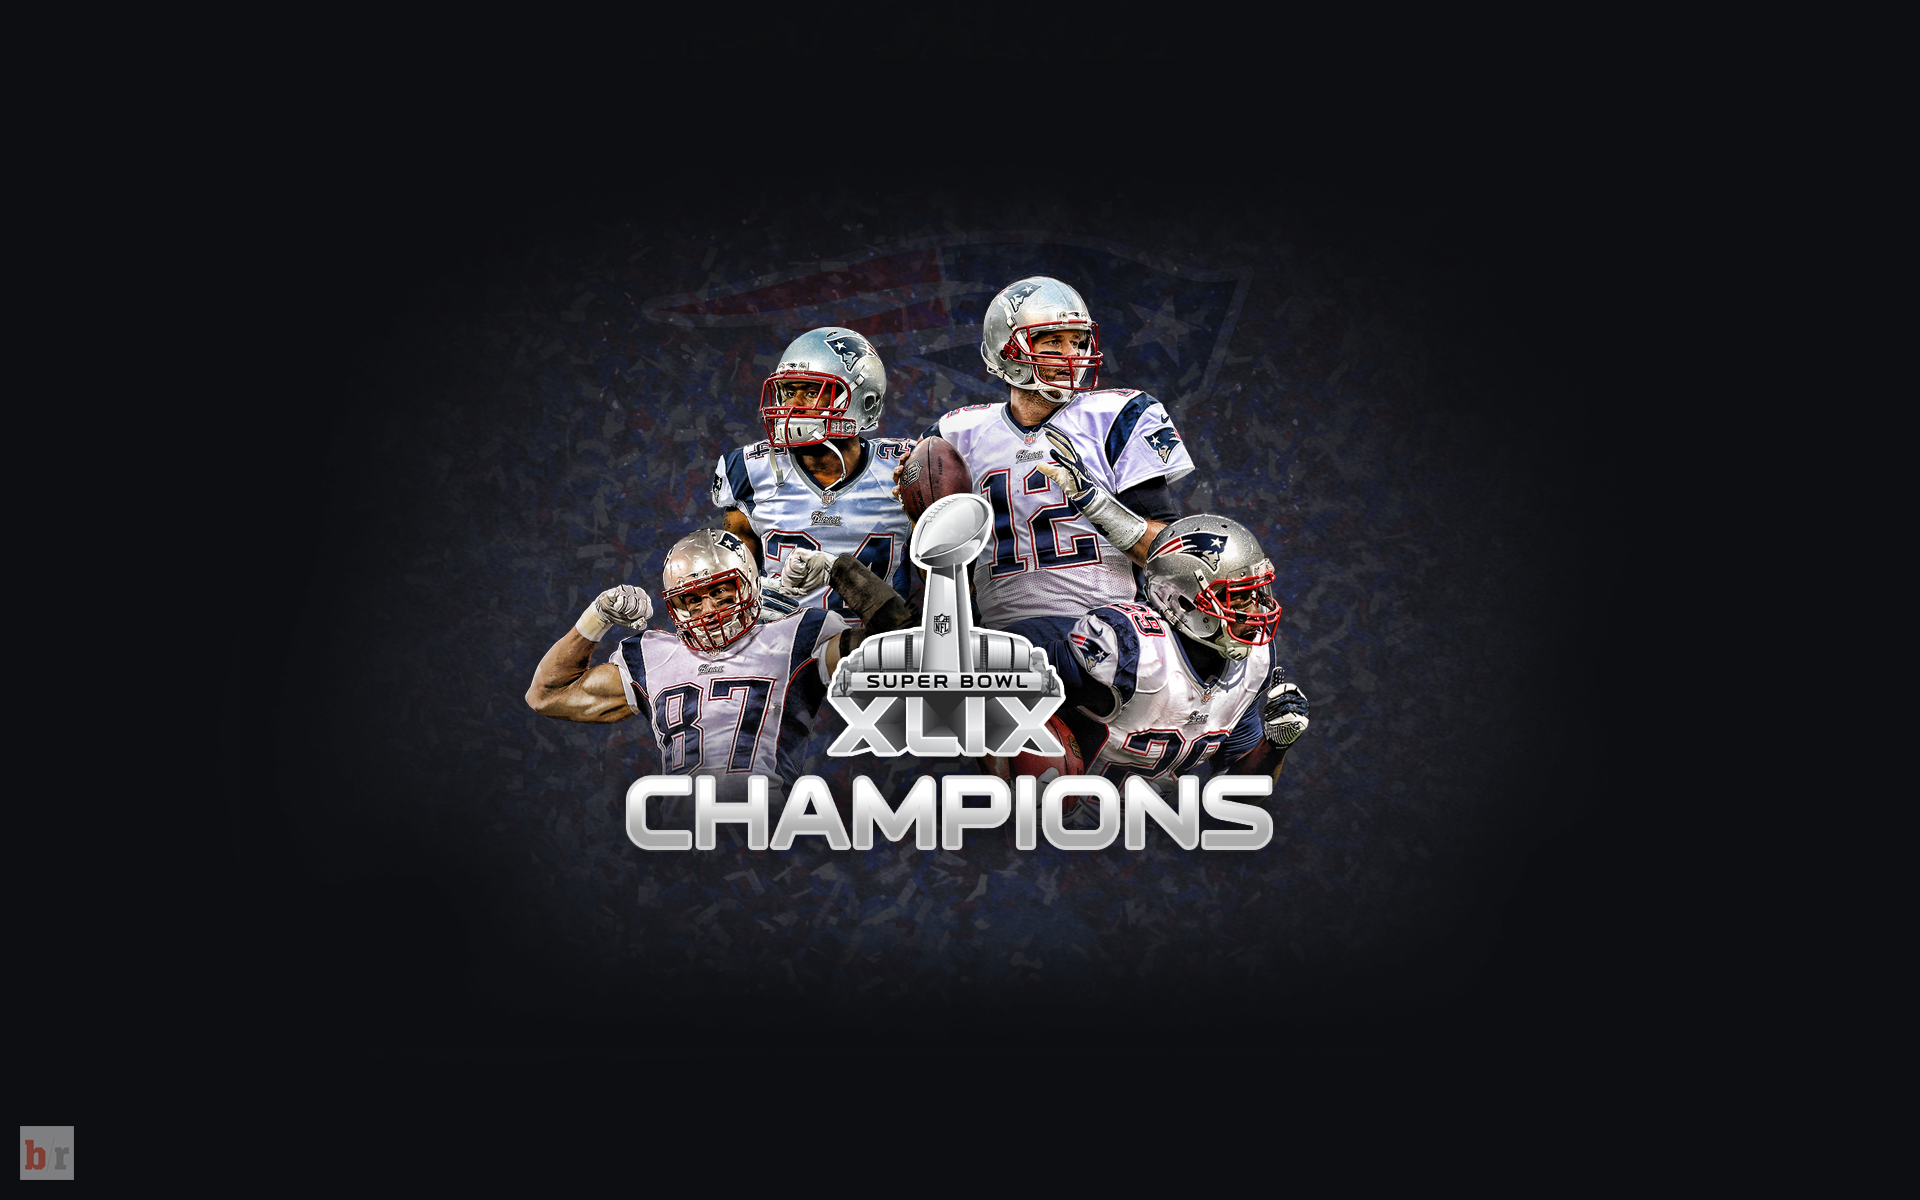 Beautiful Champion Wallpaper Background, Image, Picture